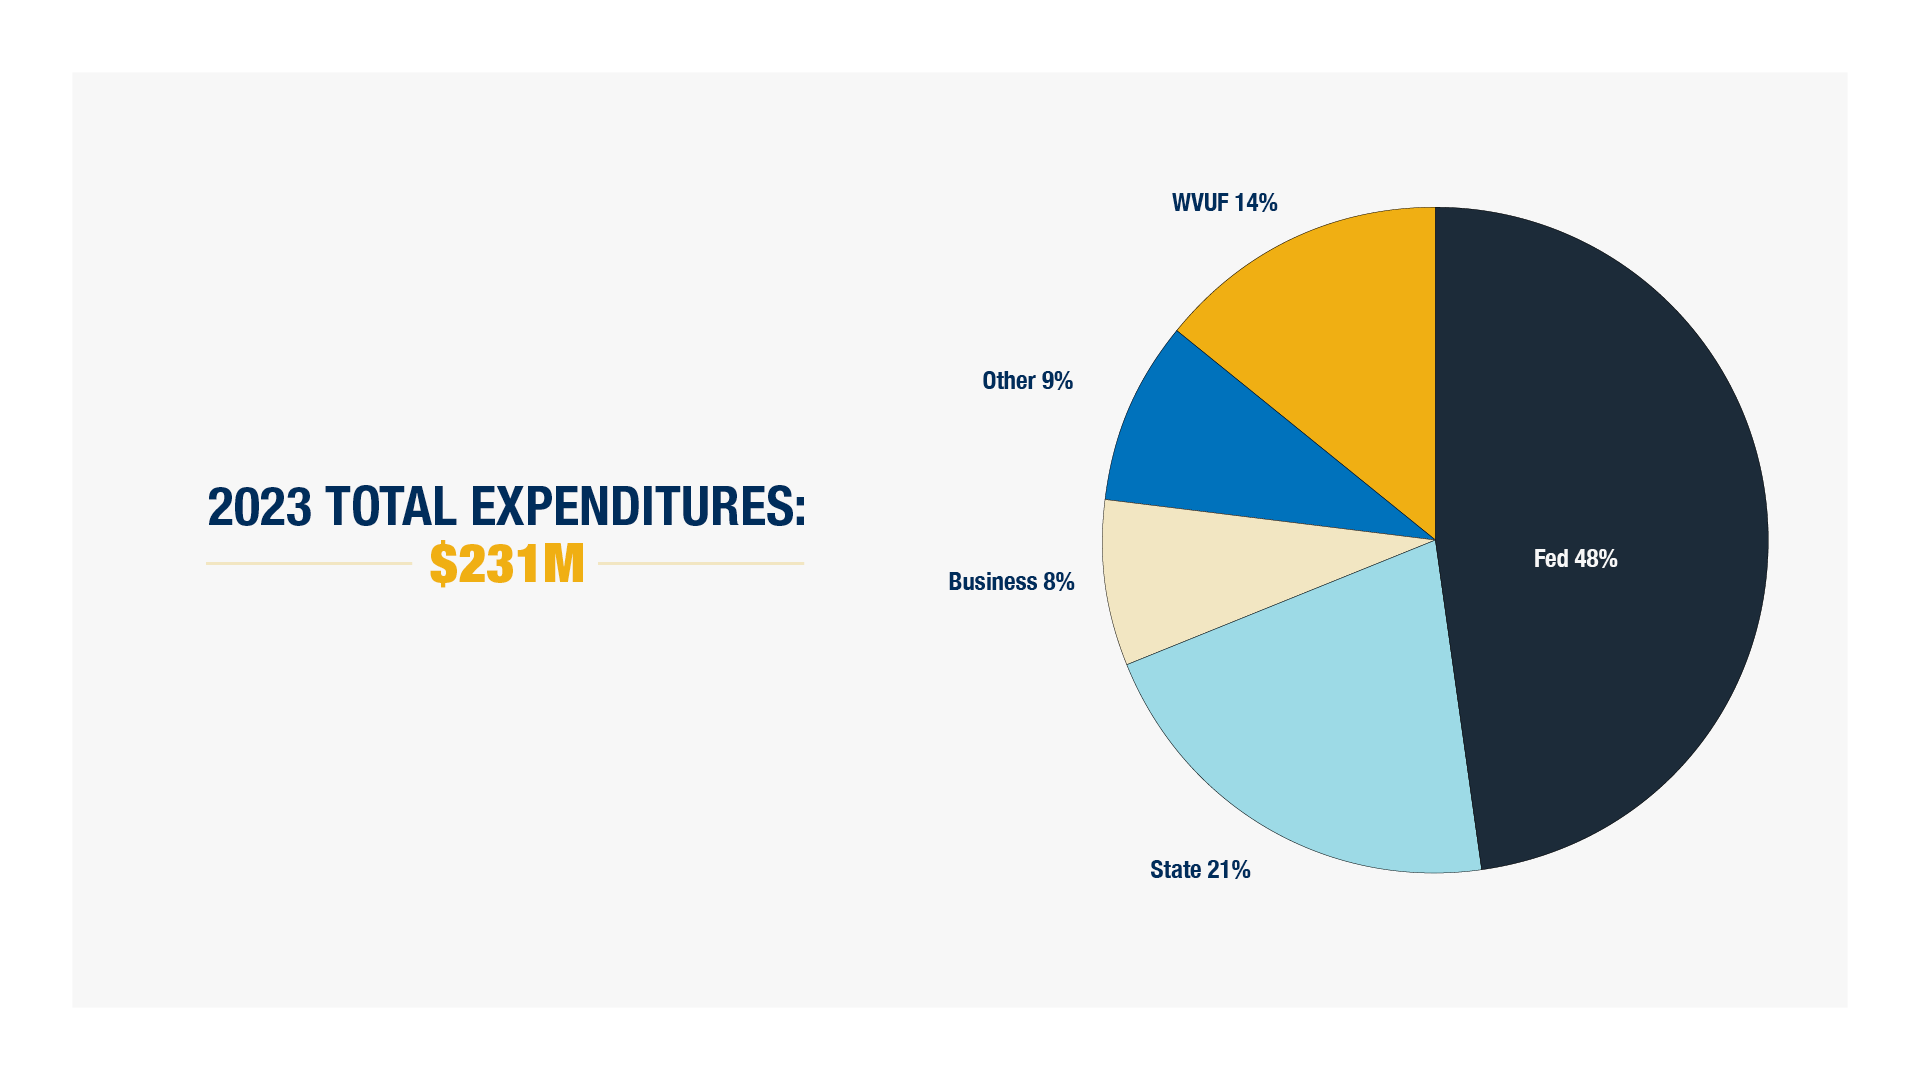 2023 Total Expenditures